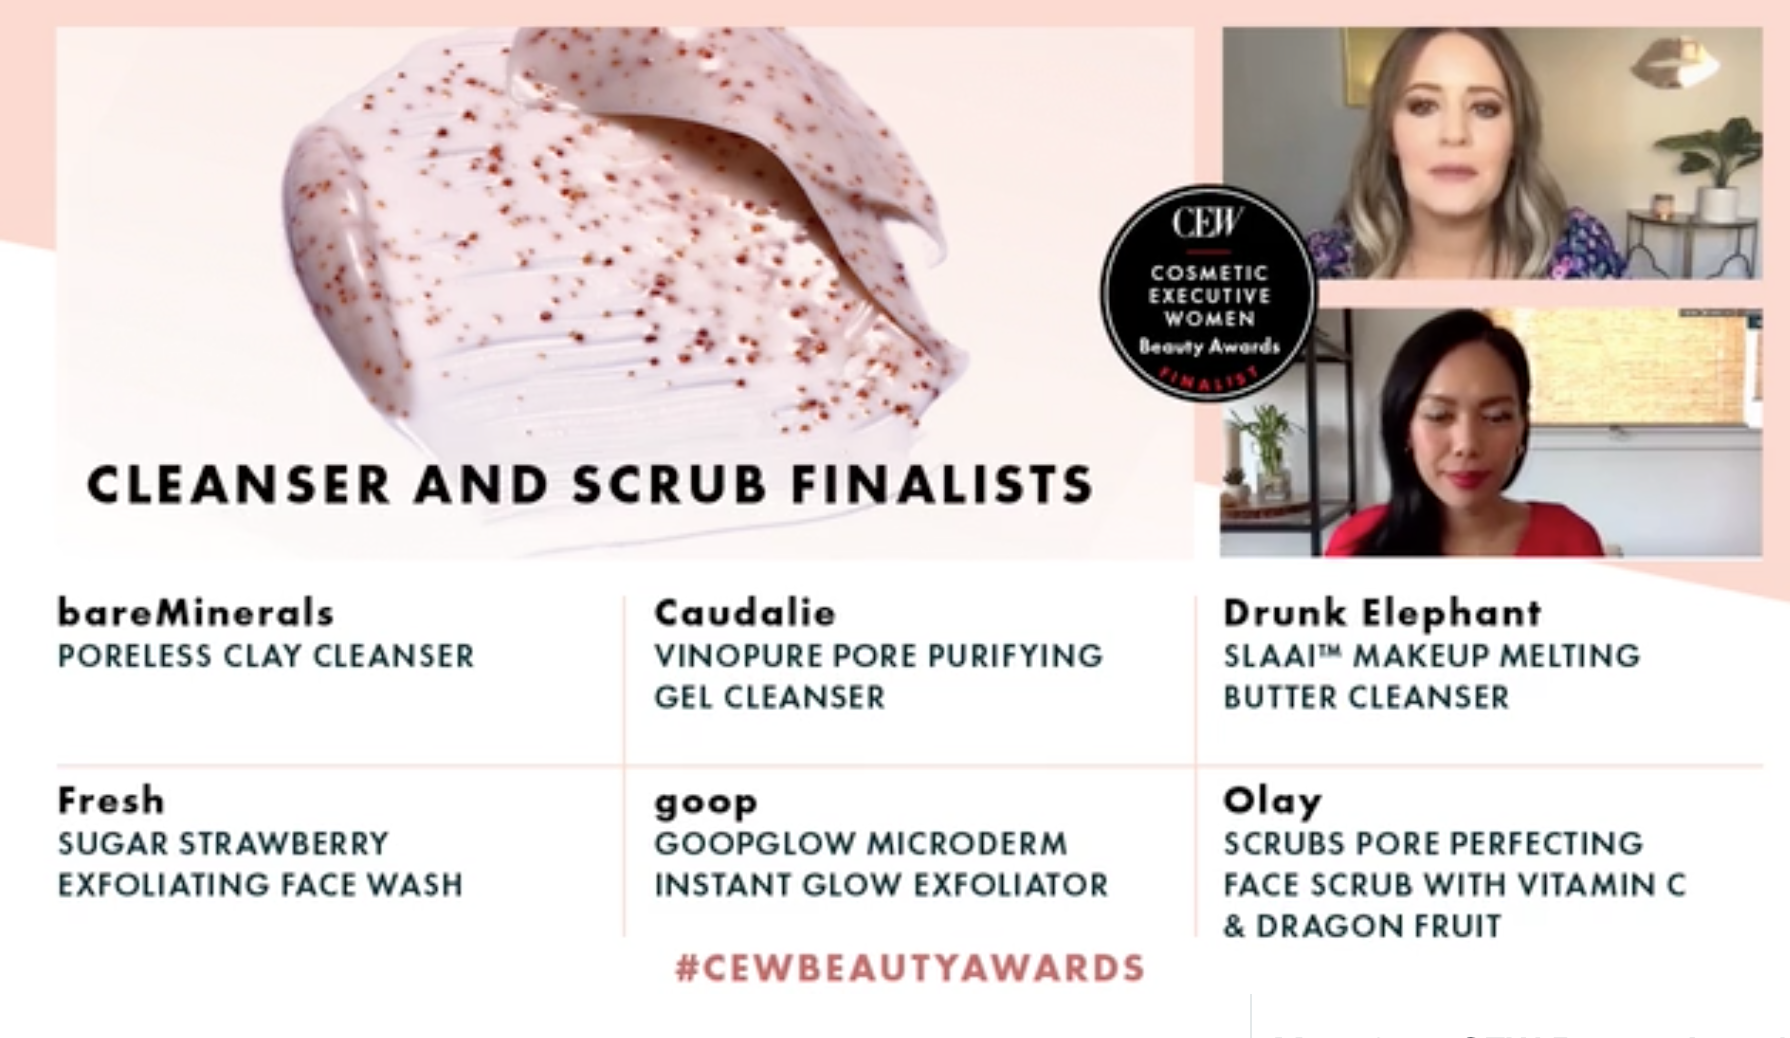 A Look at the 2020 CEW Beauty Award Finalists, Part 2